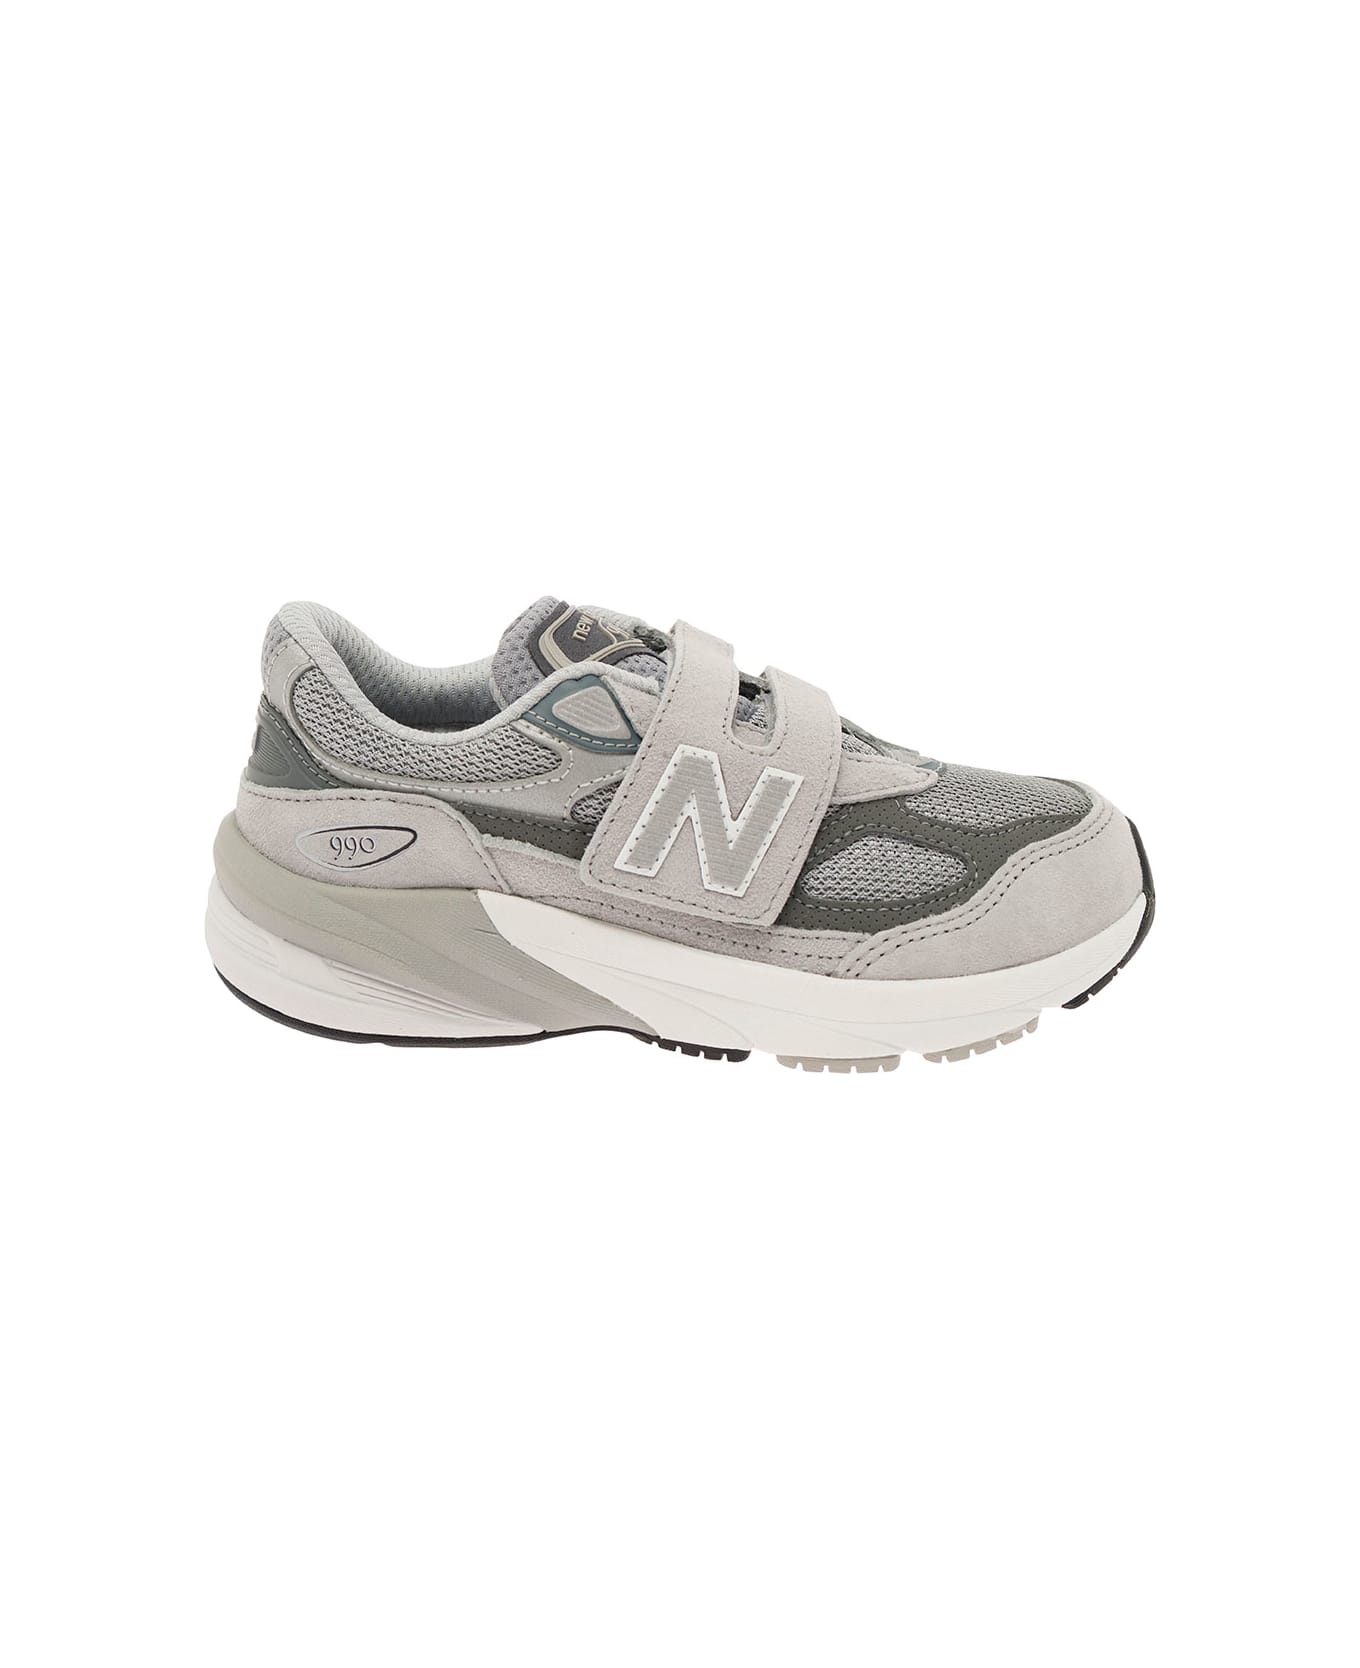 New Balance Grey Low Top Sneakers With Logo Detail In Leather And Fabric Boy - Grey